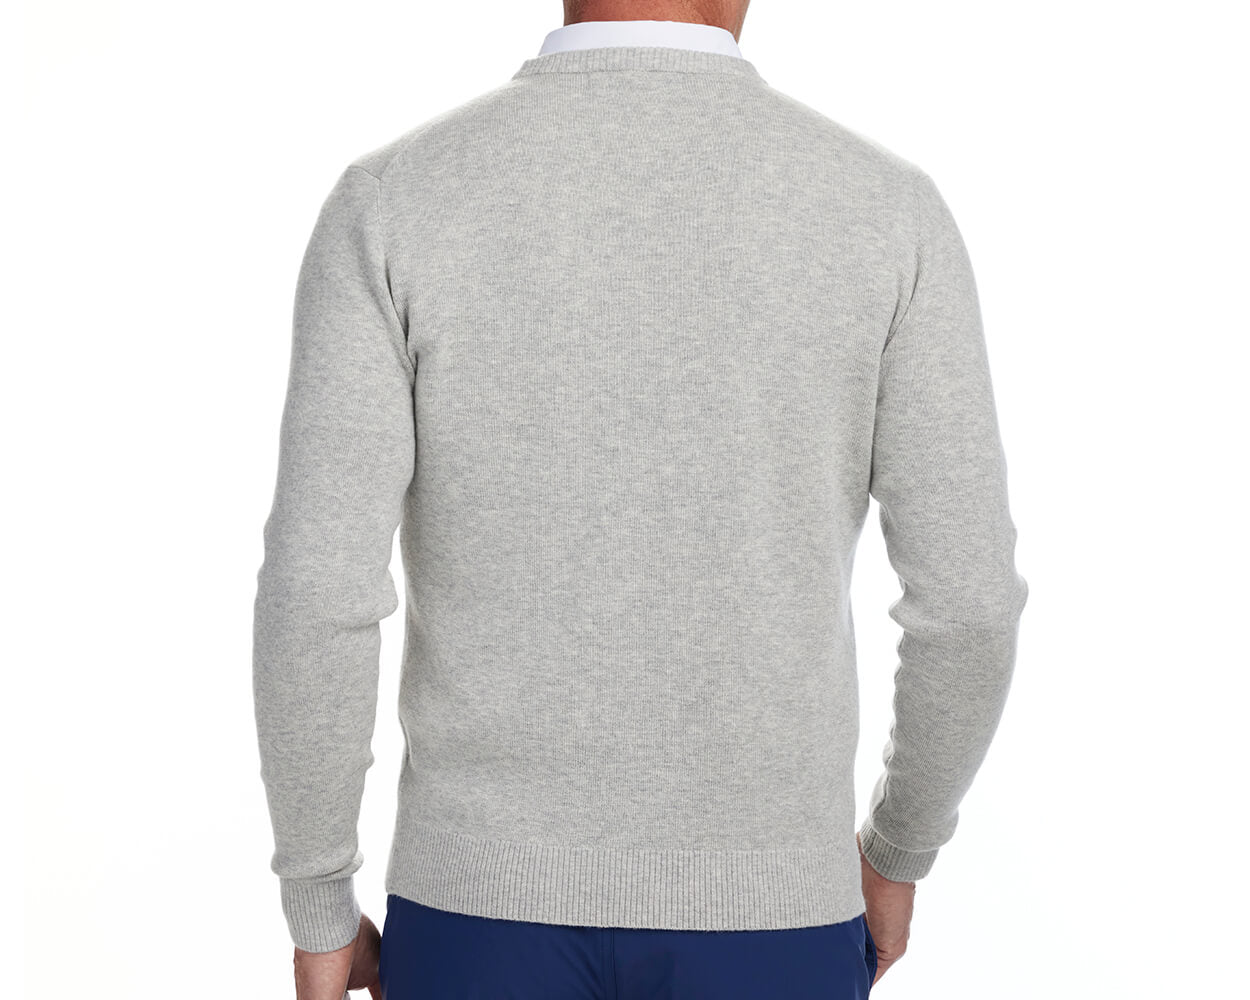 Back shot of Holderness and Bourne heathered gray sweater modeled on man's torso.